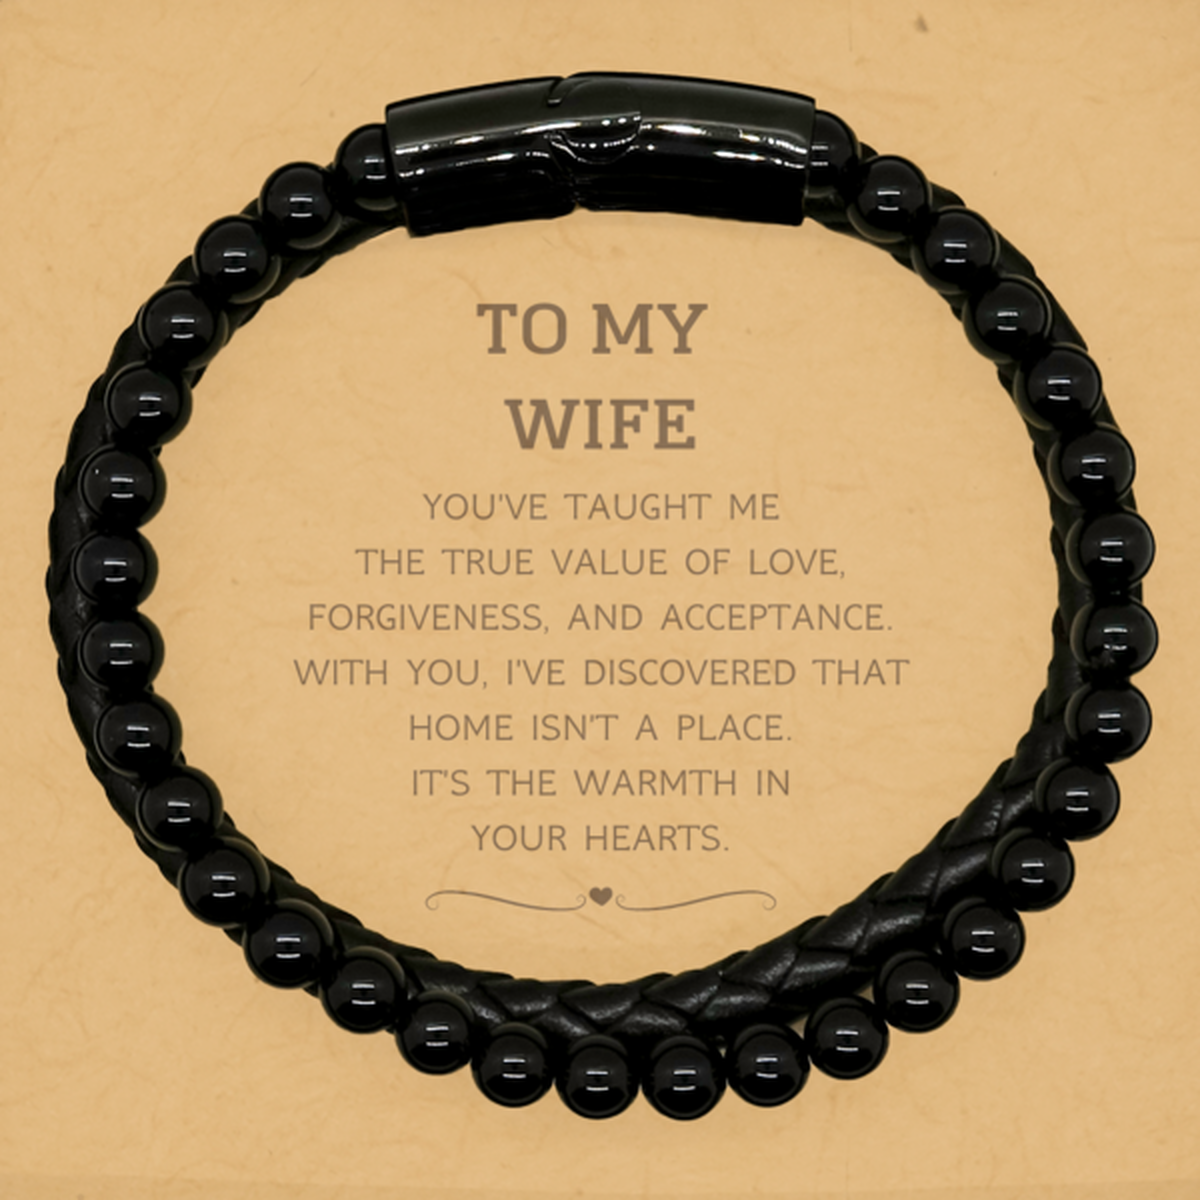 To My Wife Gifts, You've taught me the true value of love, Thank You Gifts For Wife, Birthday Stone Leather Bracelets For Wife